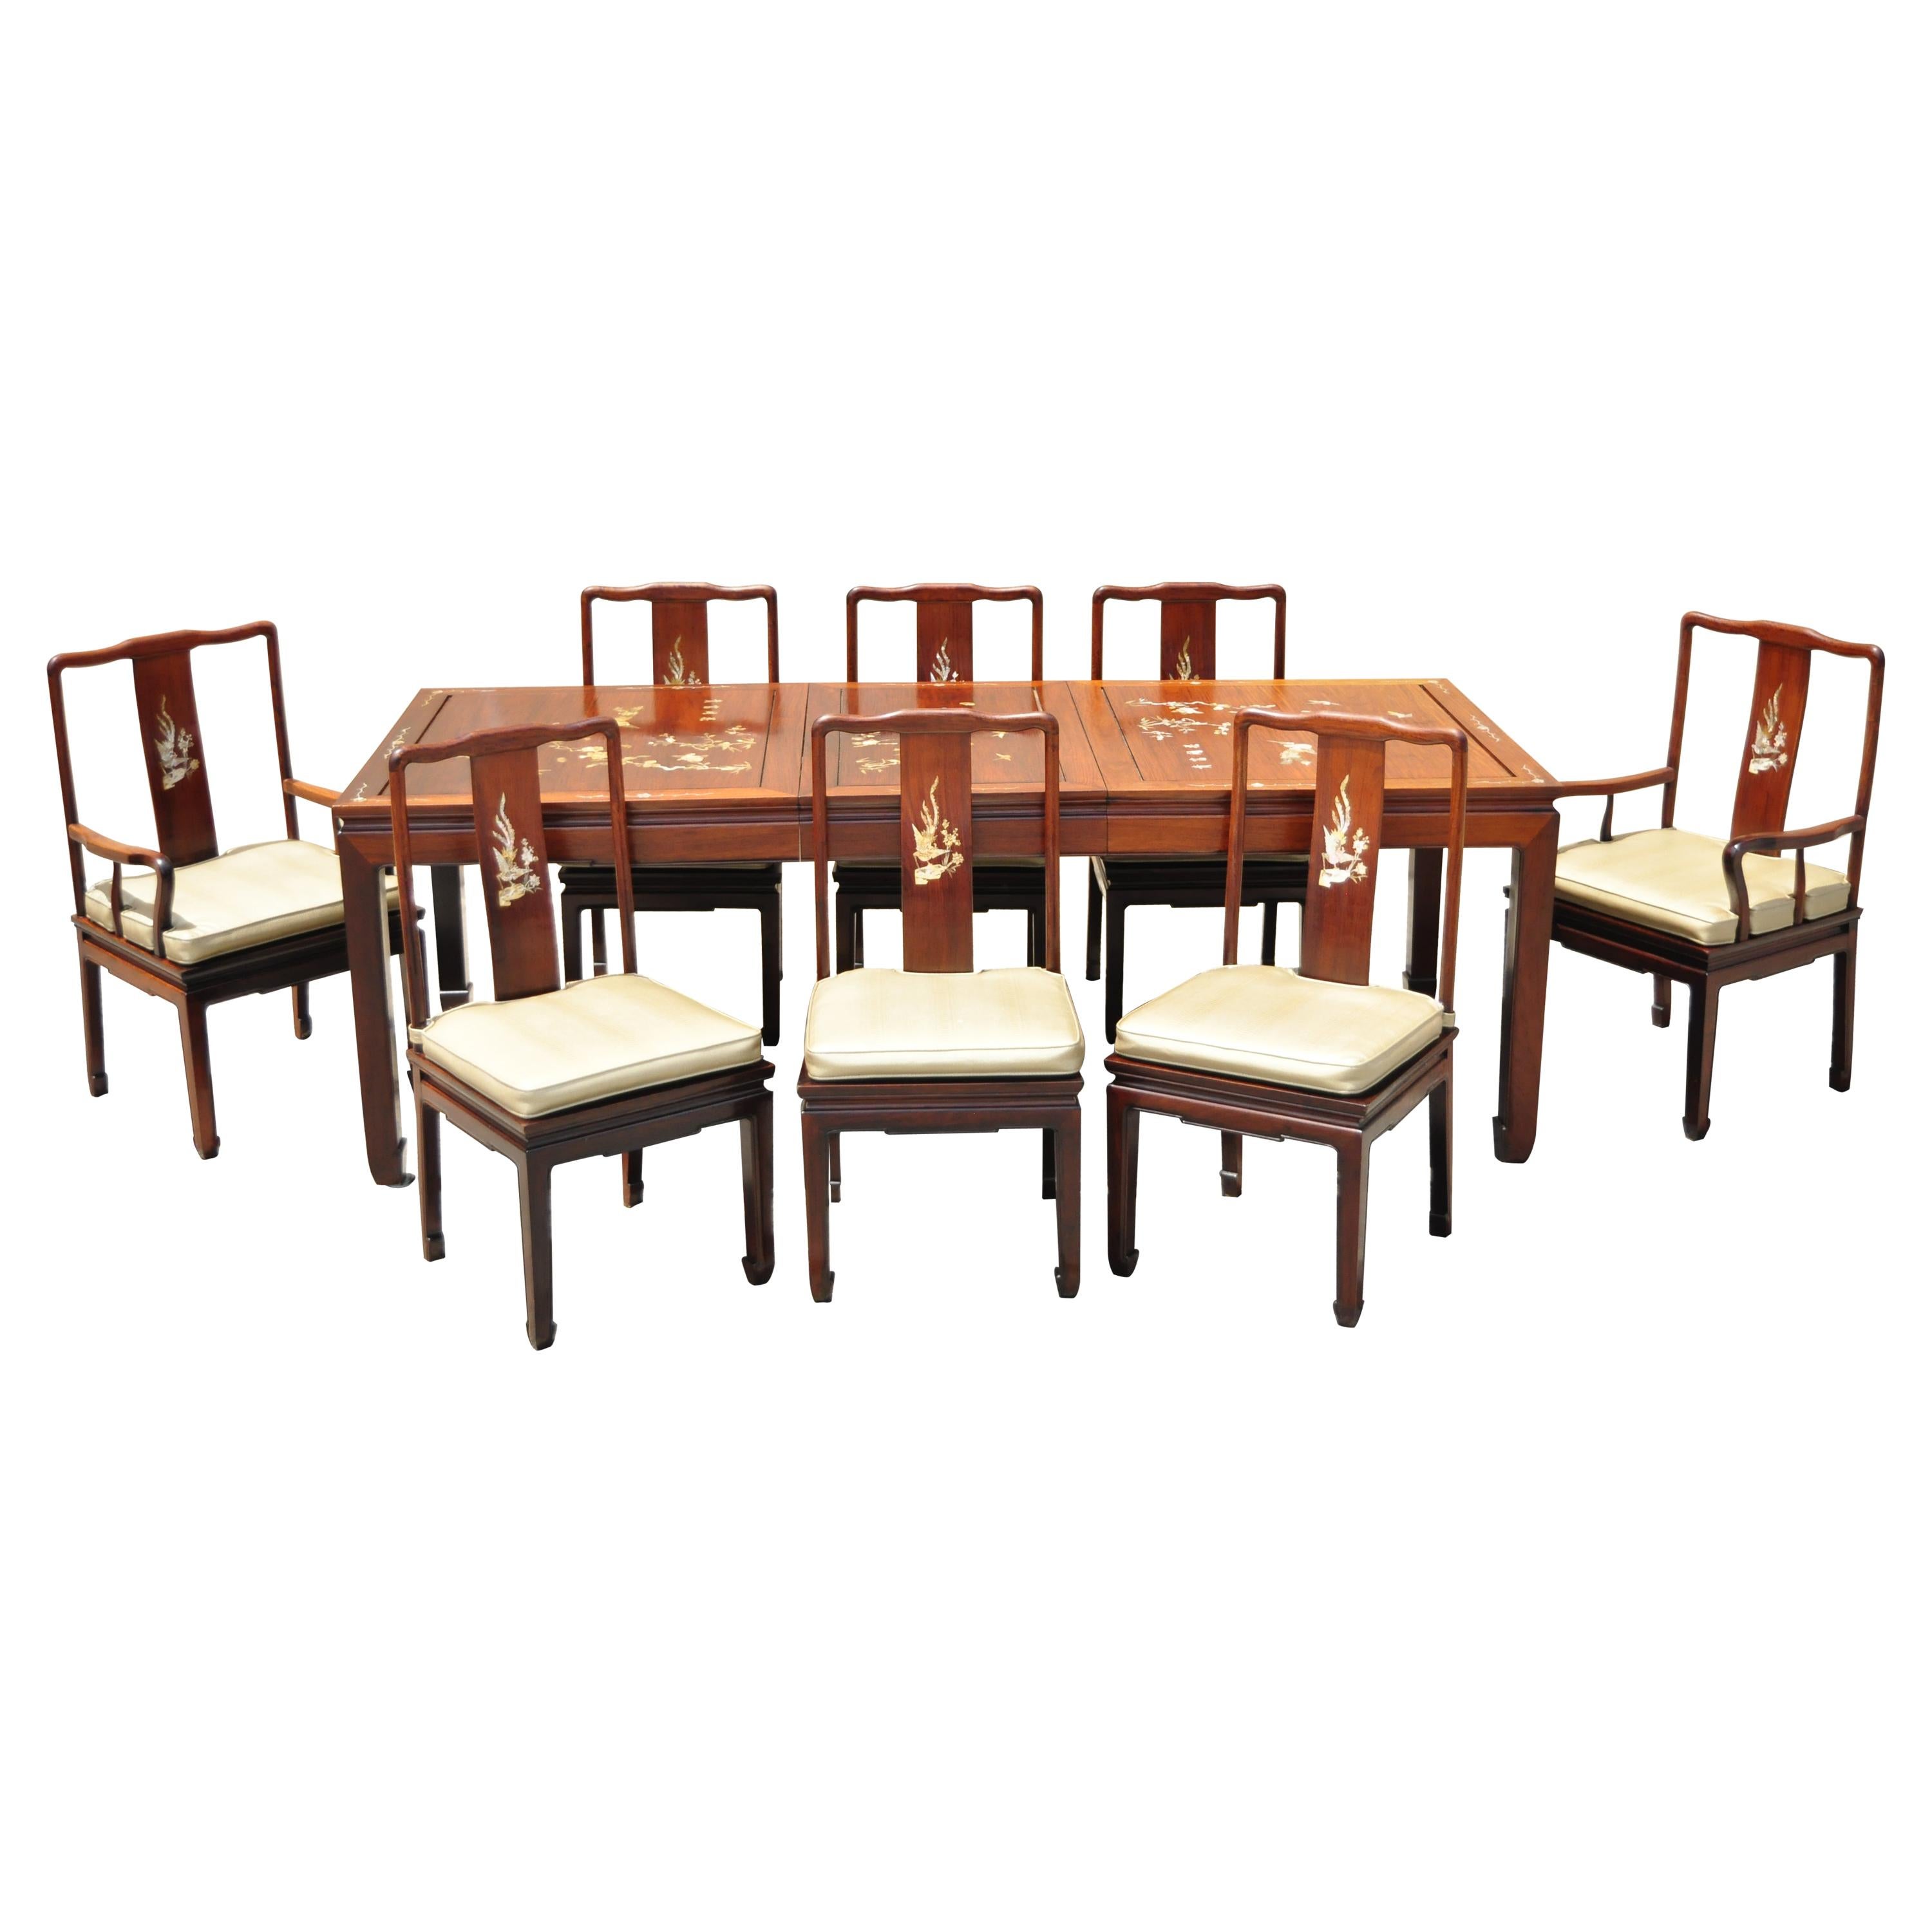 Chinese Rosewood Cherry Asian Dining Room Set Table 8 Chairs, 9pc Set For Sale